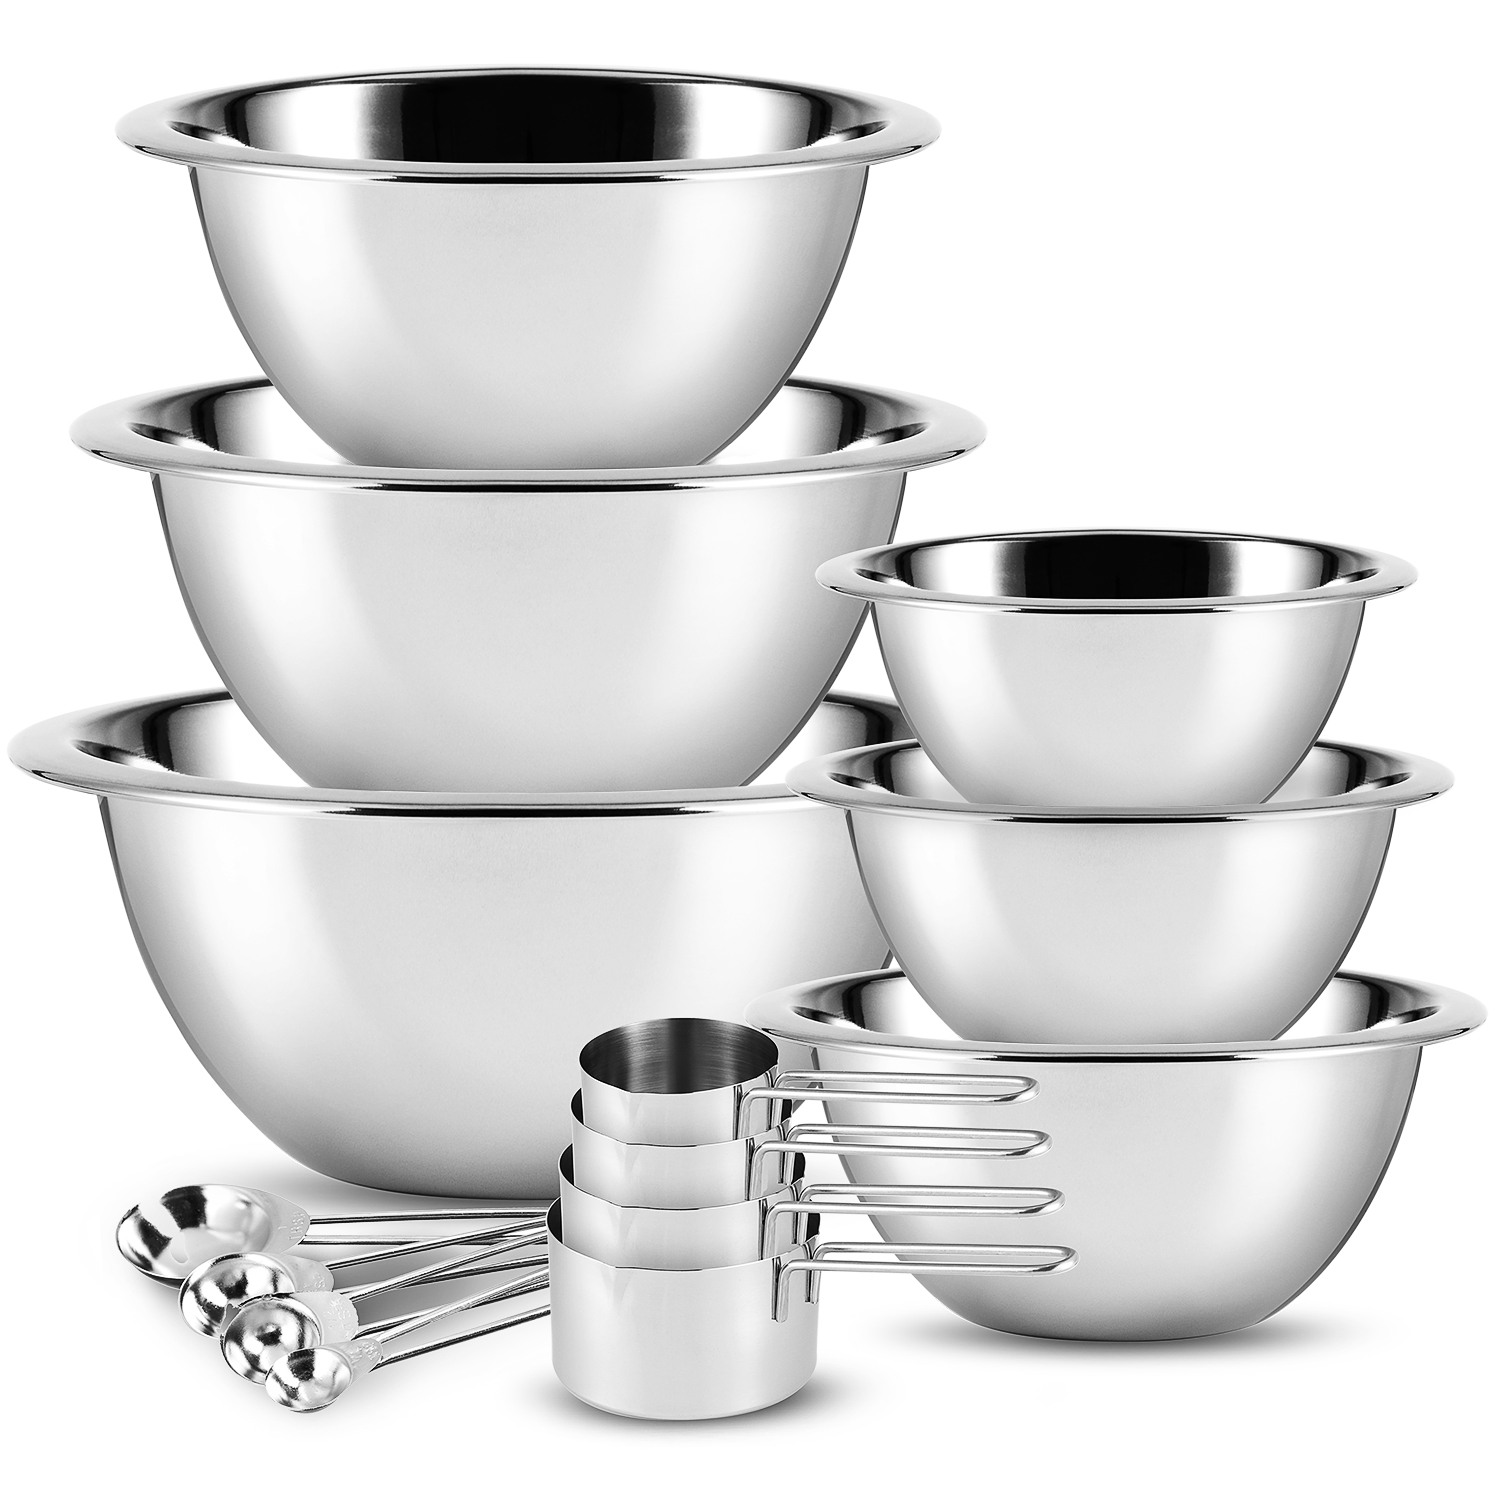 Food Network™ 6-pc. Mixing Bowl Set with Lids